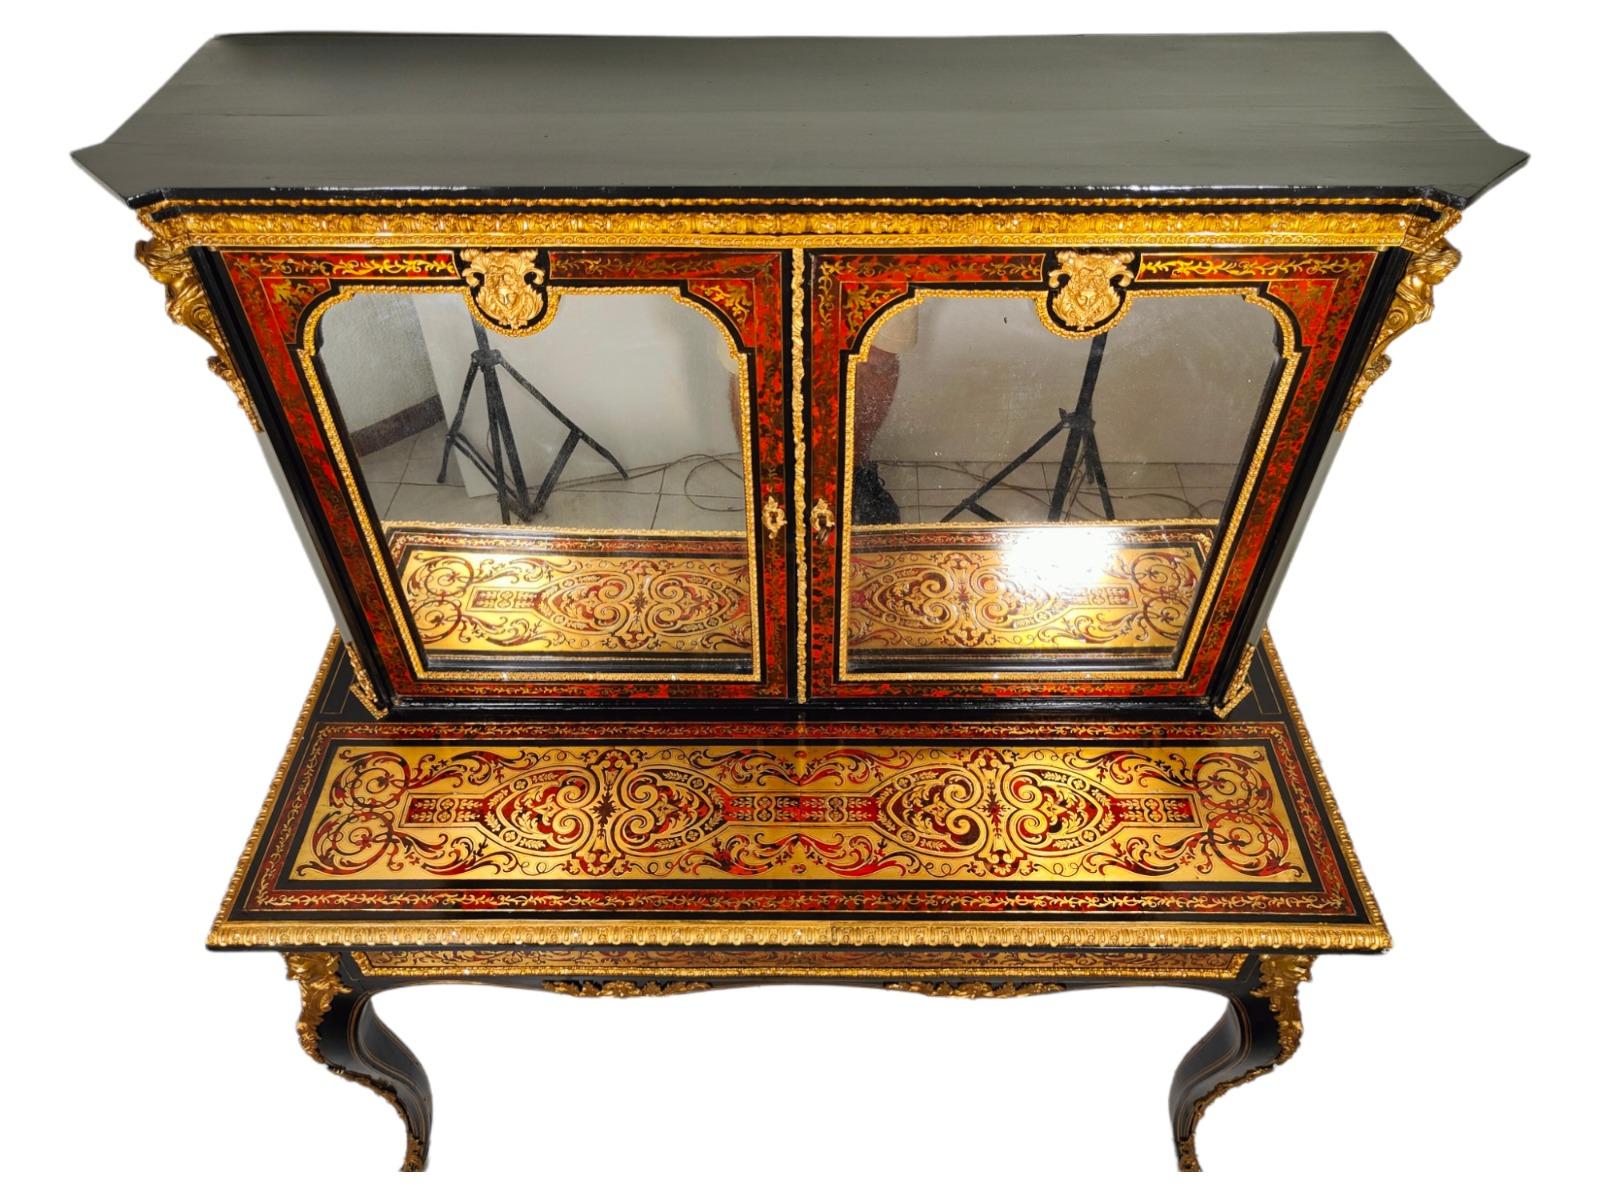 XIXth Century ebonised Boulle Bonheur Du Jour cabinet.The top has ornate brass mounts, flanked by brass gilded cariatides. Below this the two doors, each profusely inlaid with brass, open to reveal a polished interior with a single shelf. The